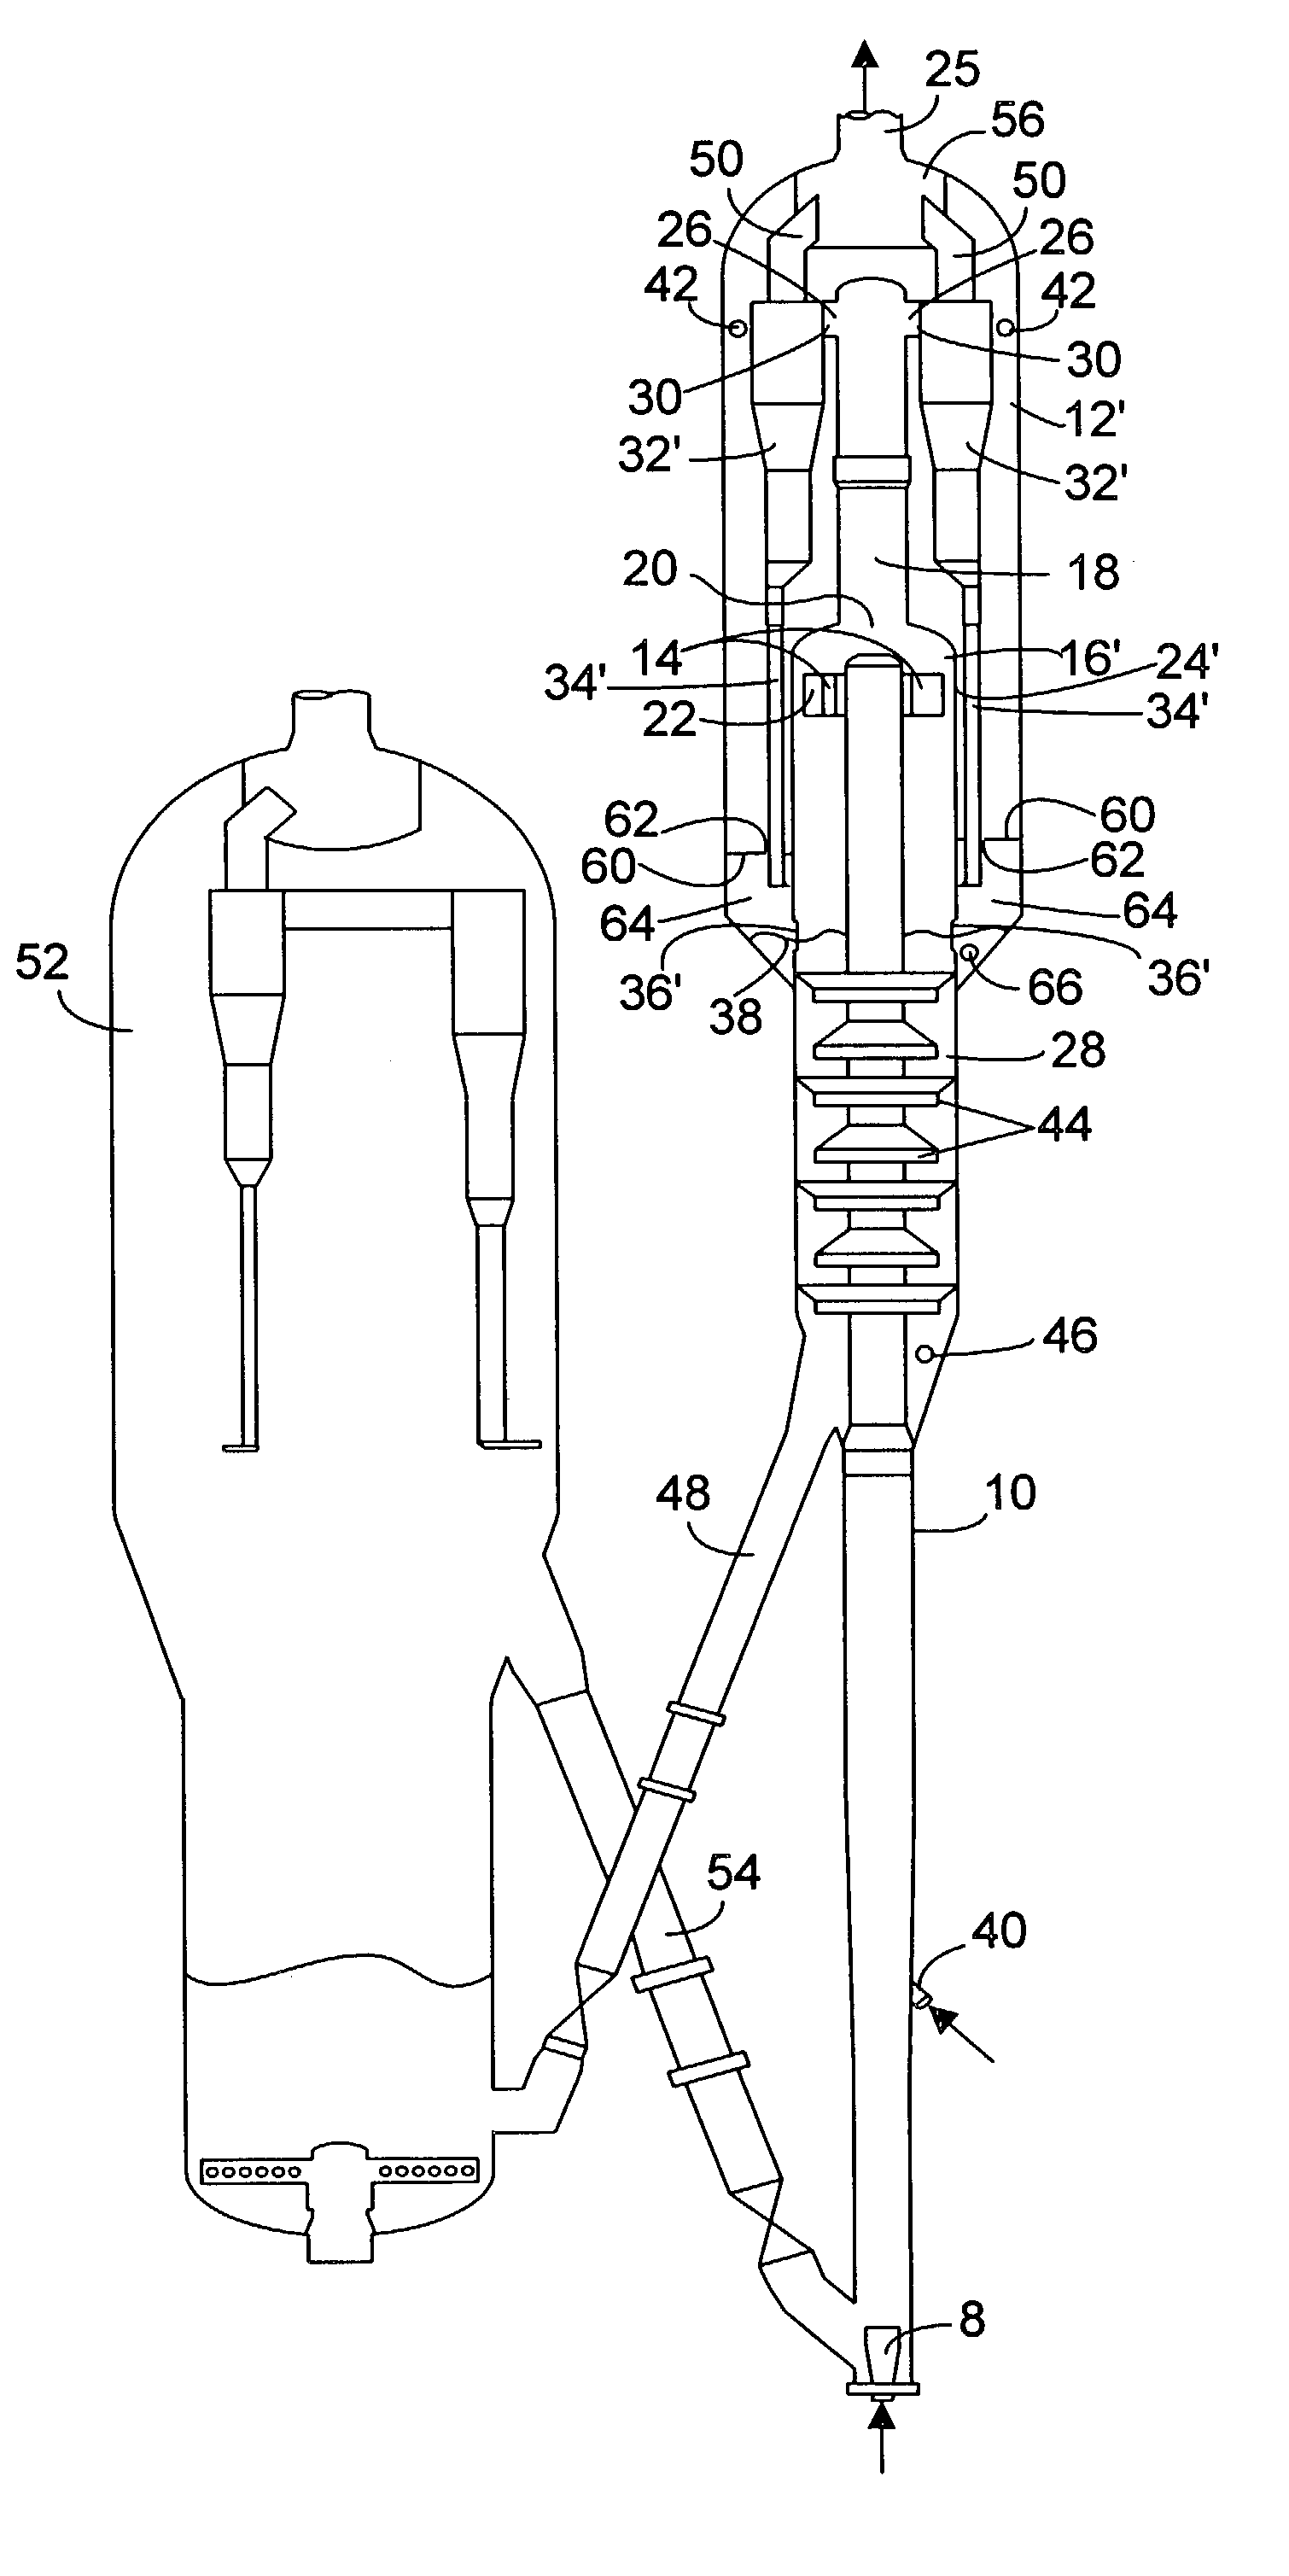 Apparatus and process for minimizing catalyst residence time in a reactor vessel